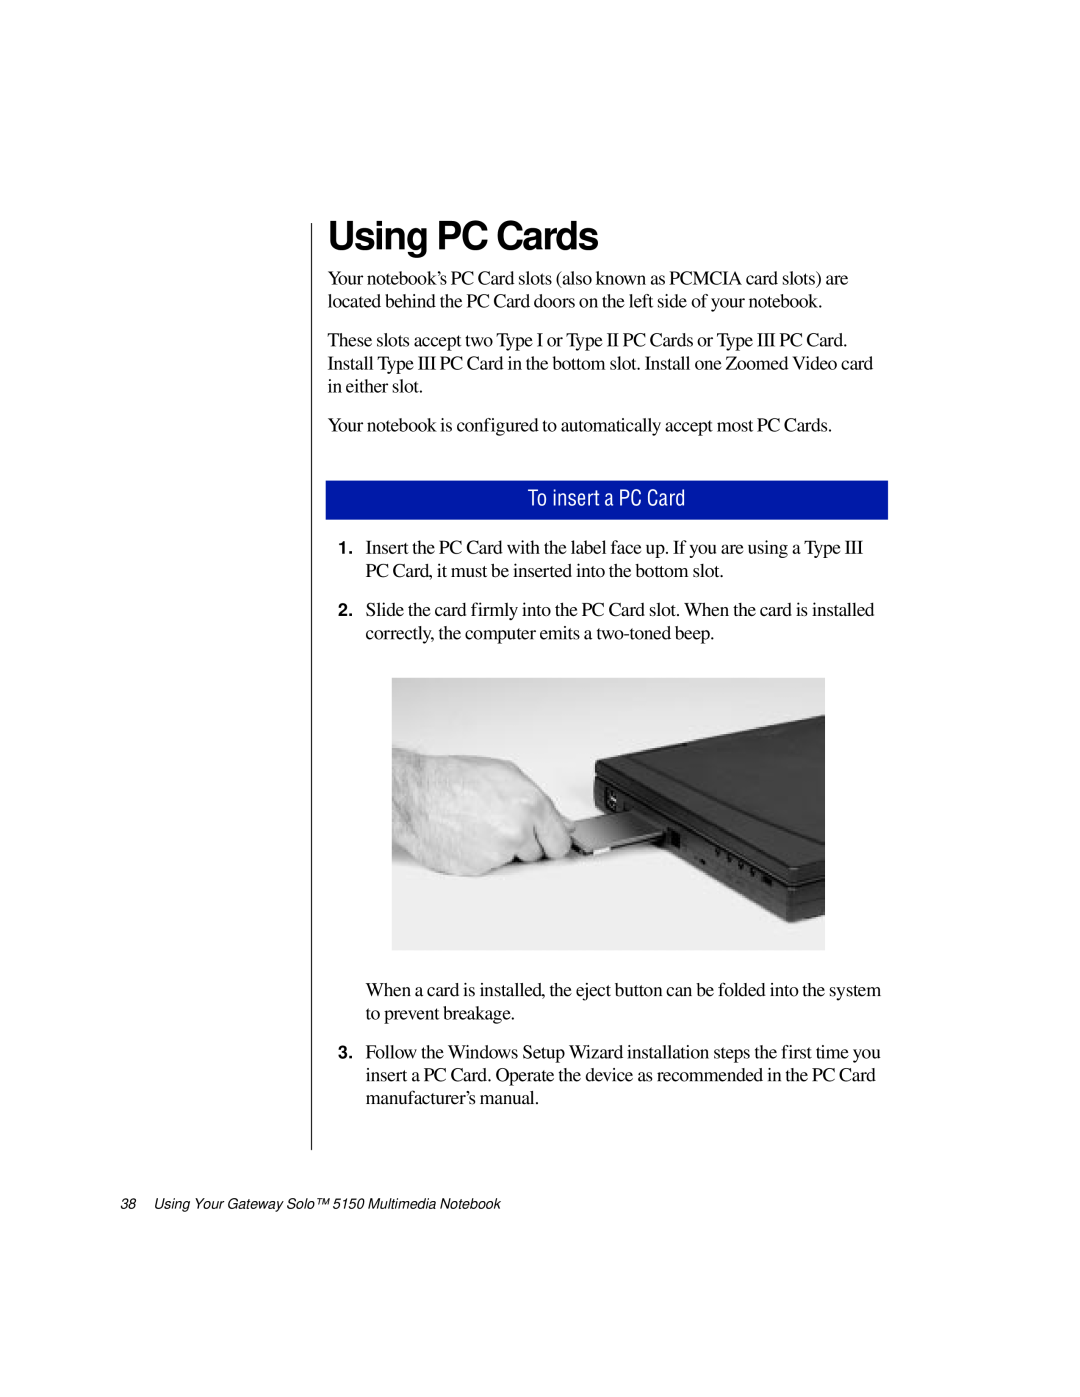 Gateway TM 5150 manual Using PC Cards, To insert a PC Card 